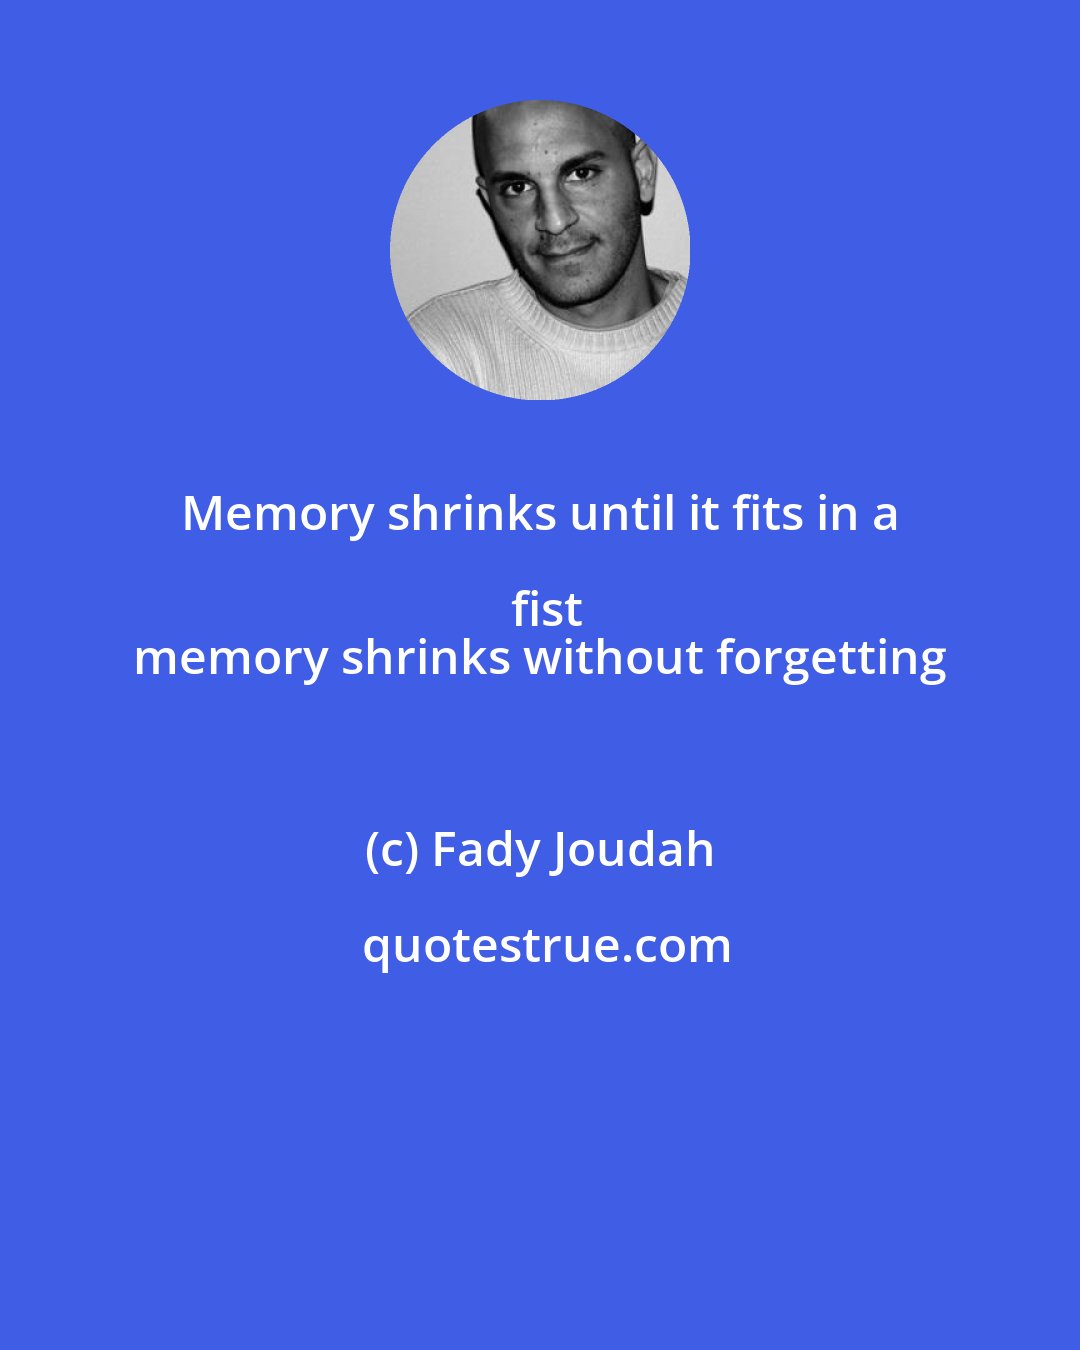 Fady Joudah: Memory shrinks until it fits in a fist
 memory shrinks without forgetting